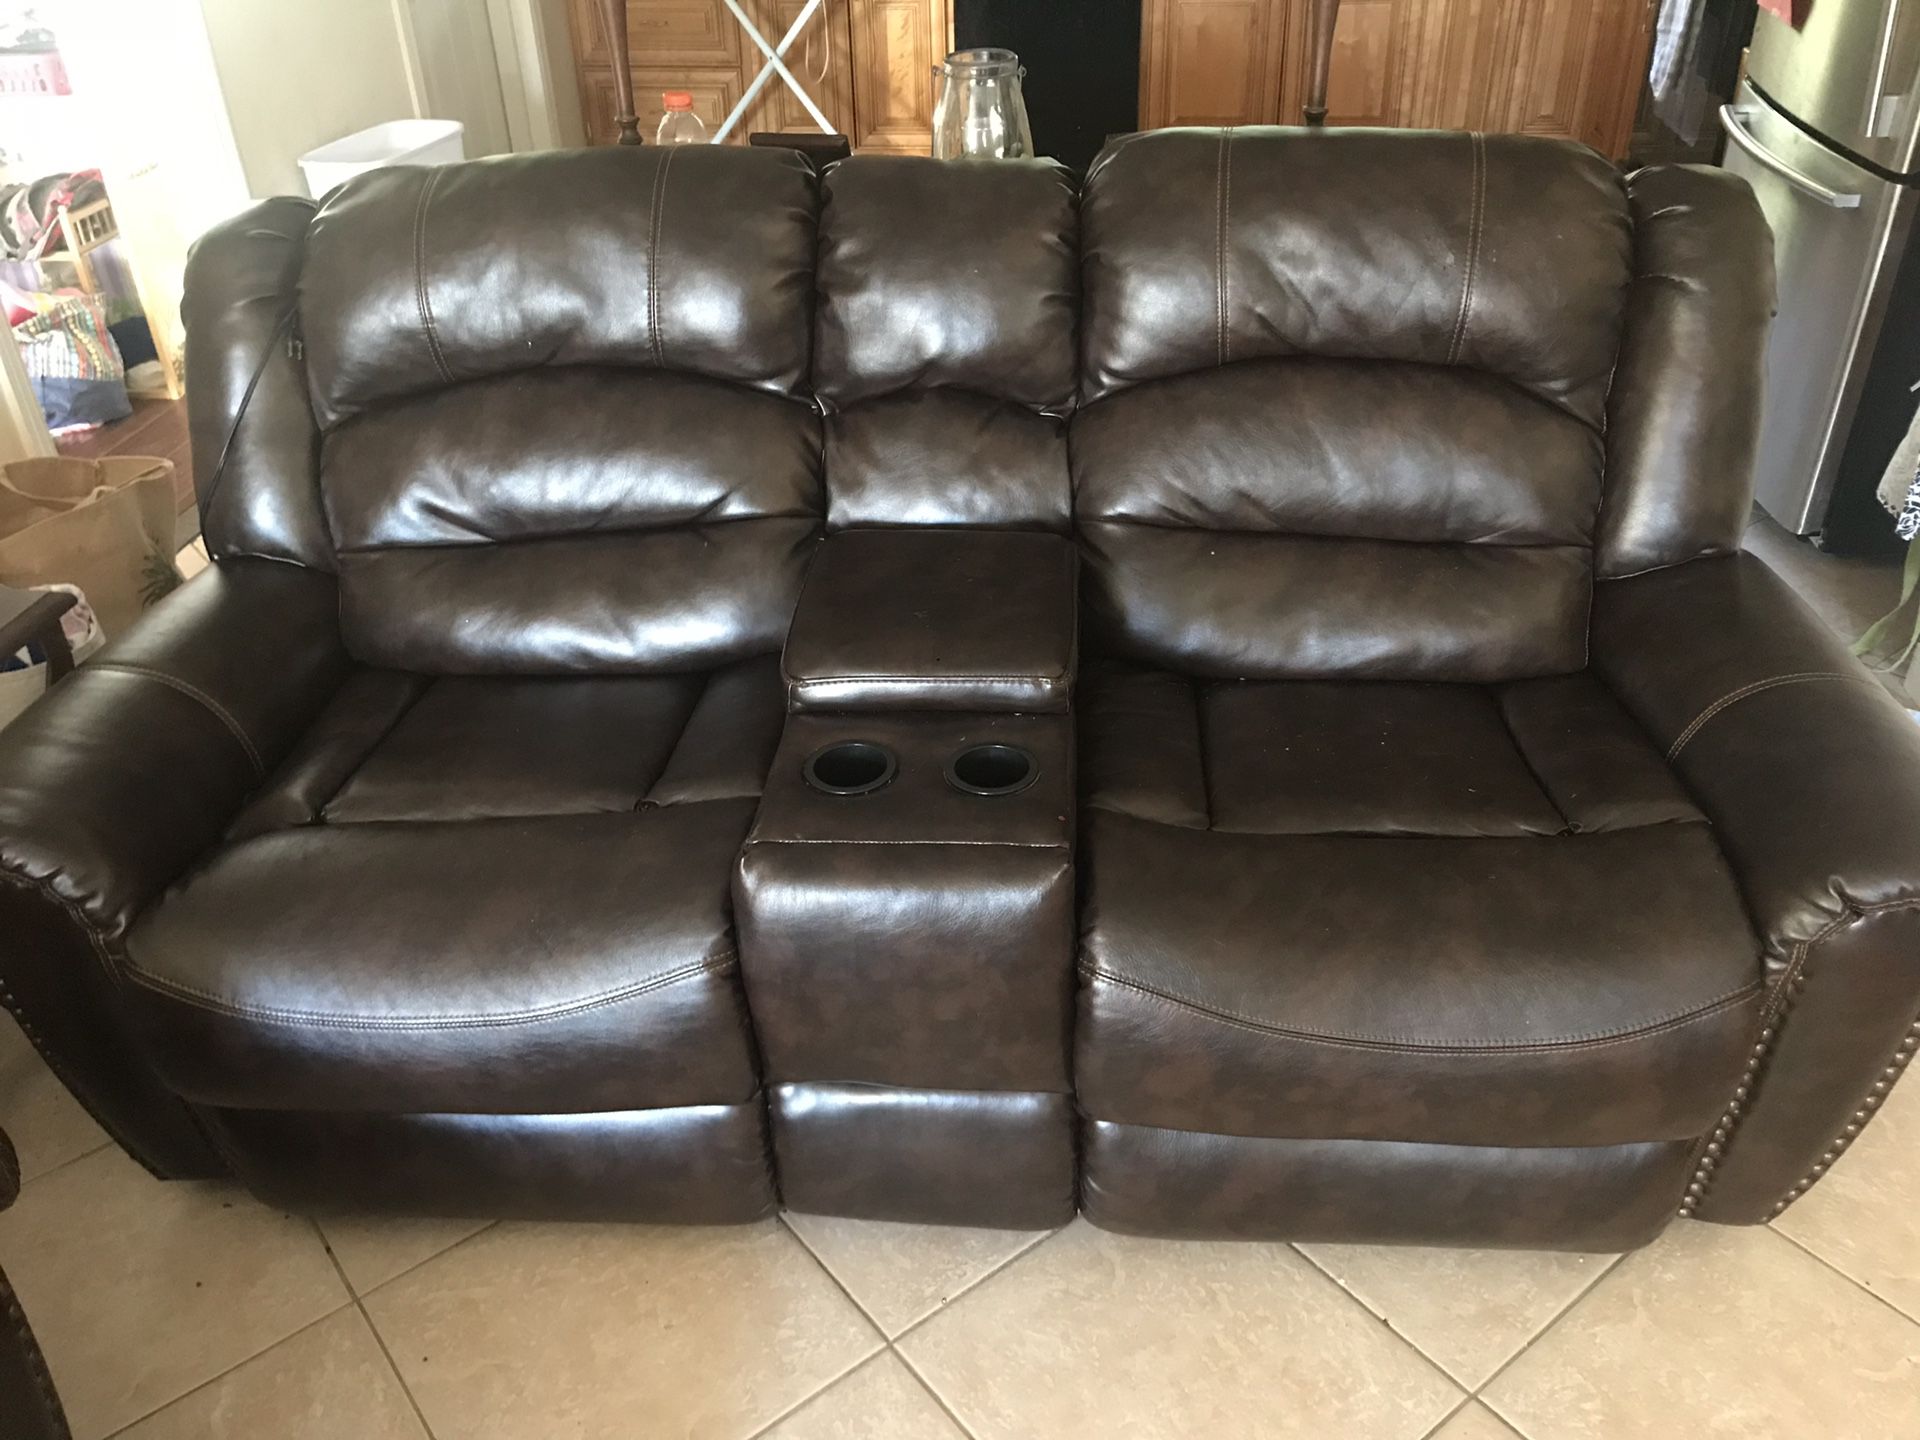 FREE 2 couches